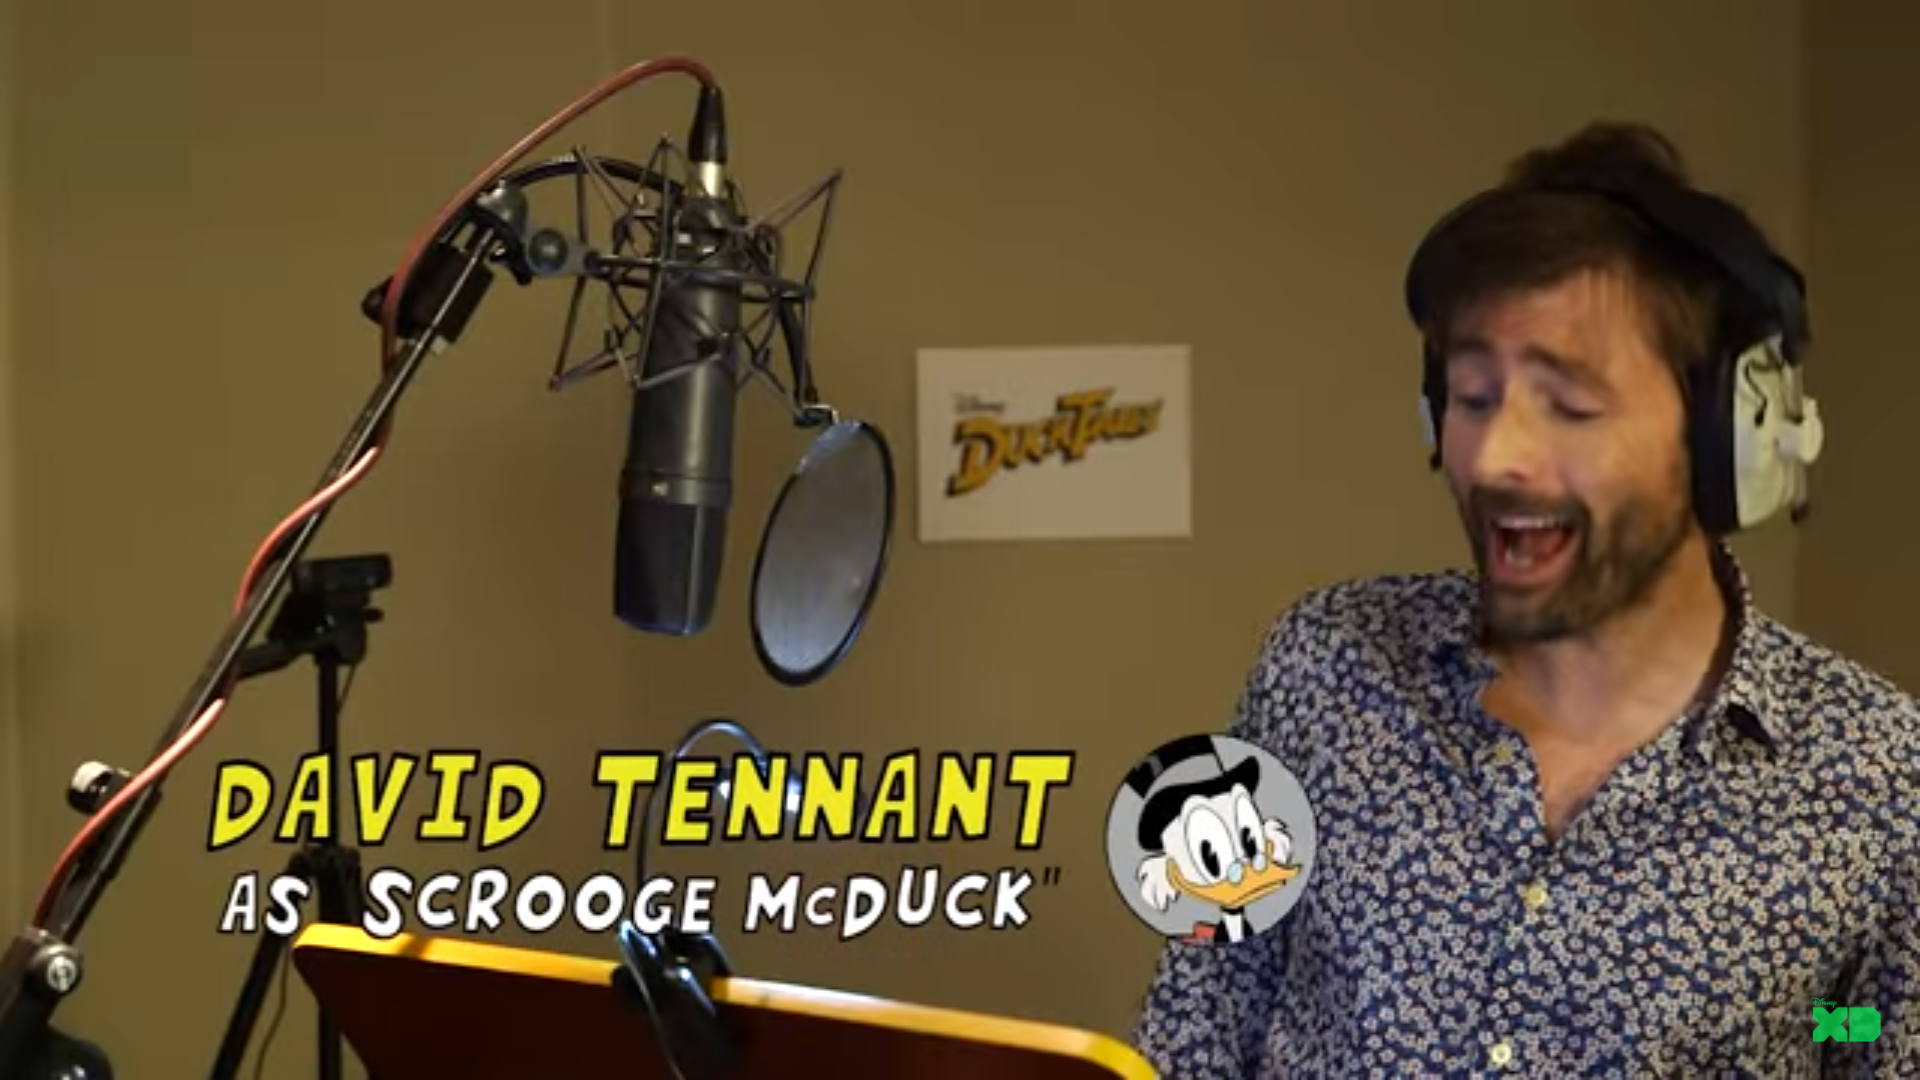 David Tennant, Danny Pudi, and Others Join DuckTales Cast and Sing Theme Song!